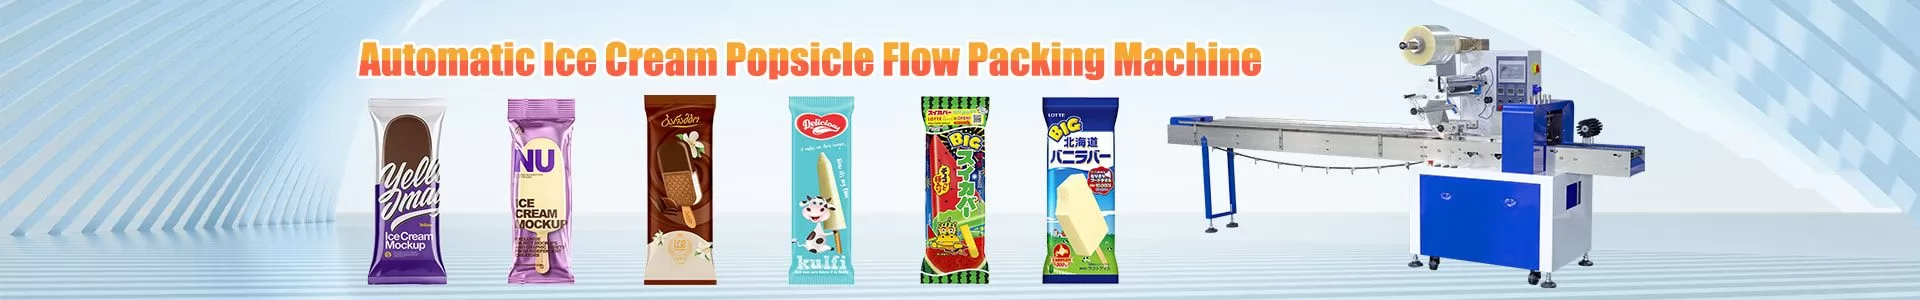 Popsicle Packing Machine